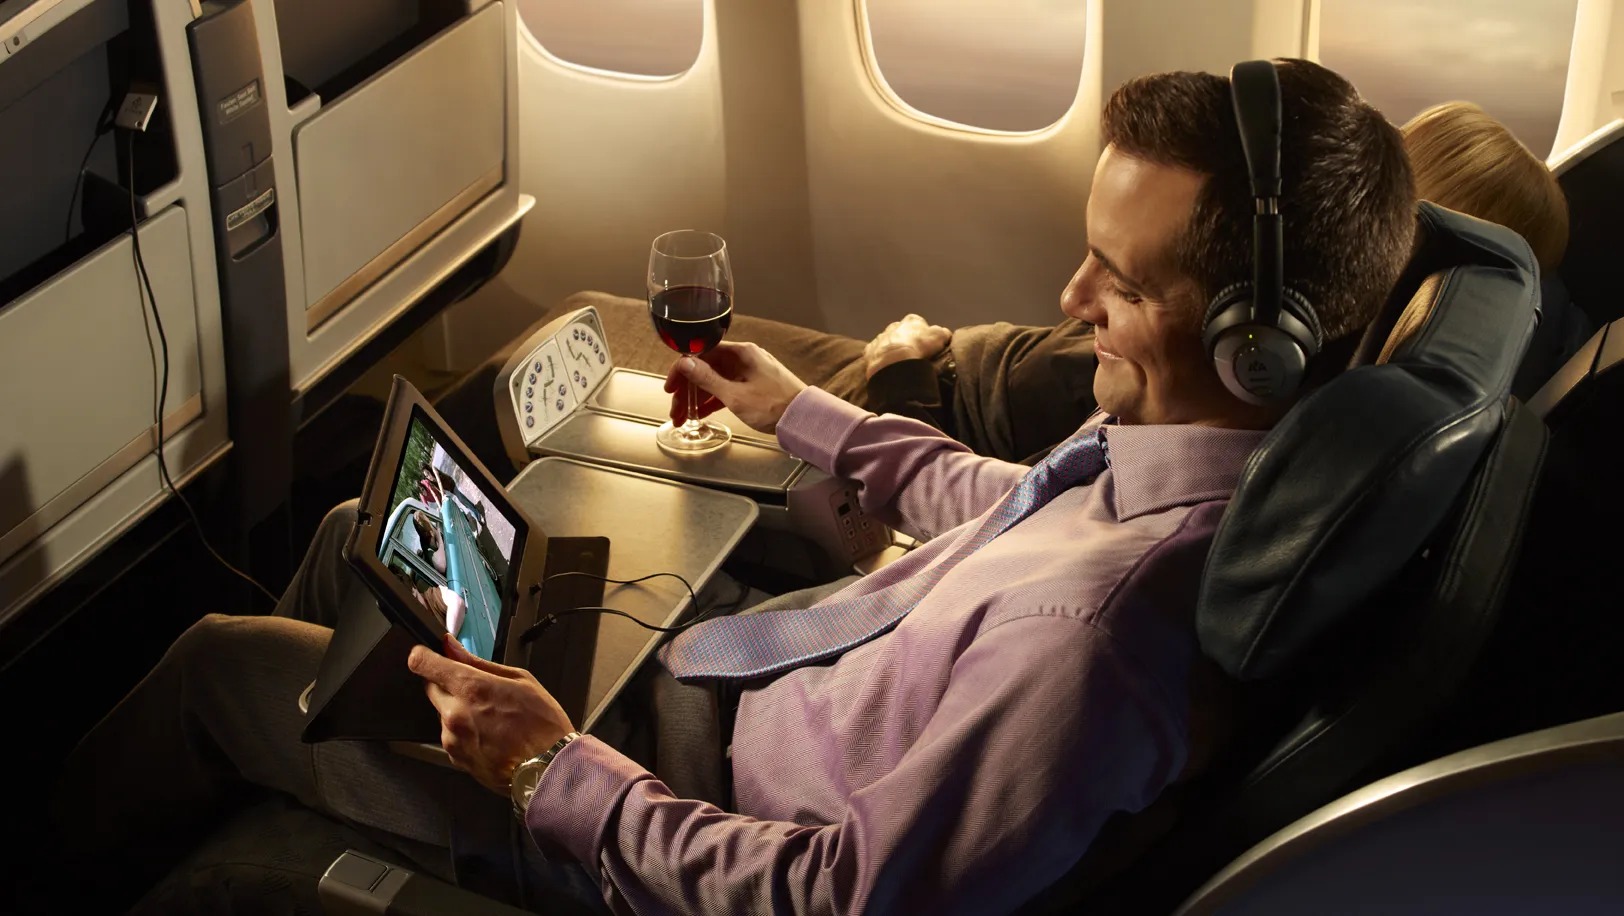 How To Download A Movie To Watch On A Plane